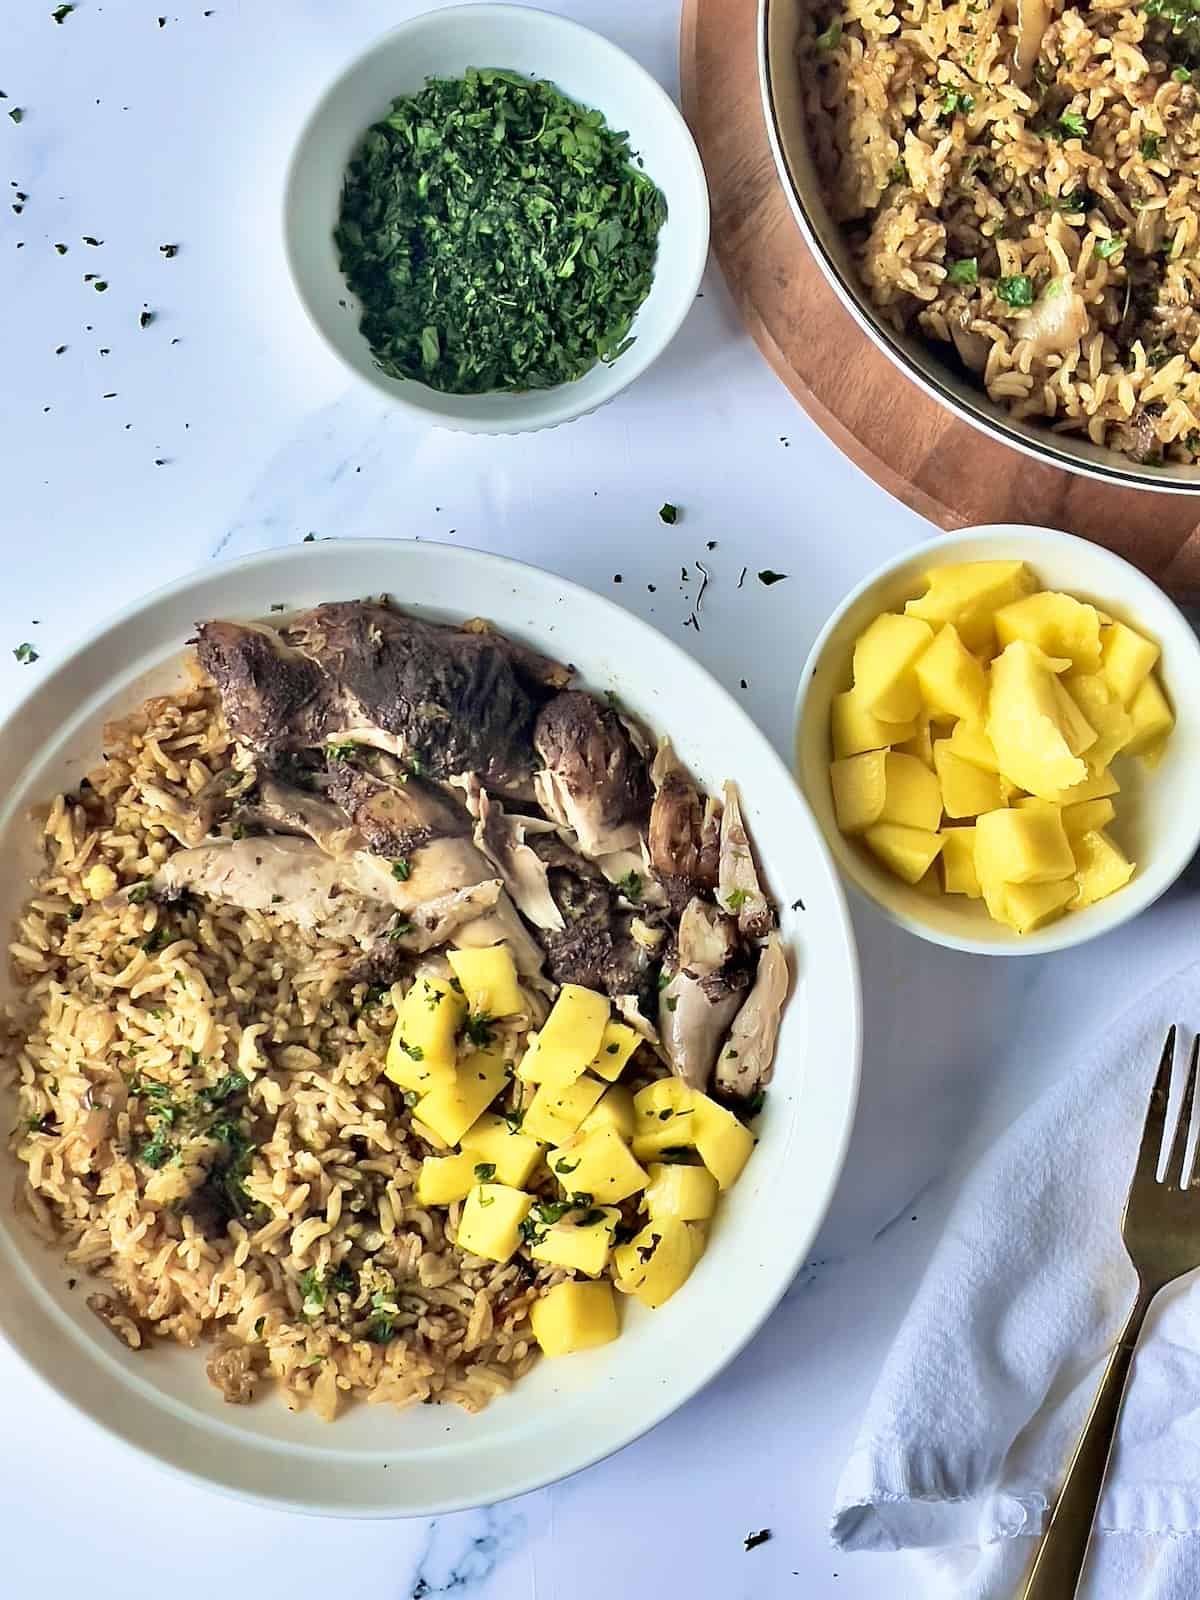 instant pot jerk chicken and rice in a white bowl with a bowl of cilantro and bowl of mango, next to a large serving dish or Carribean rice.